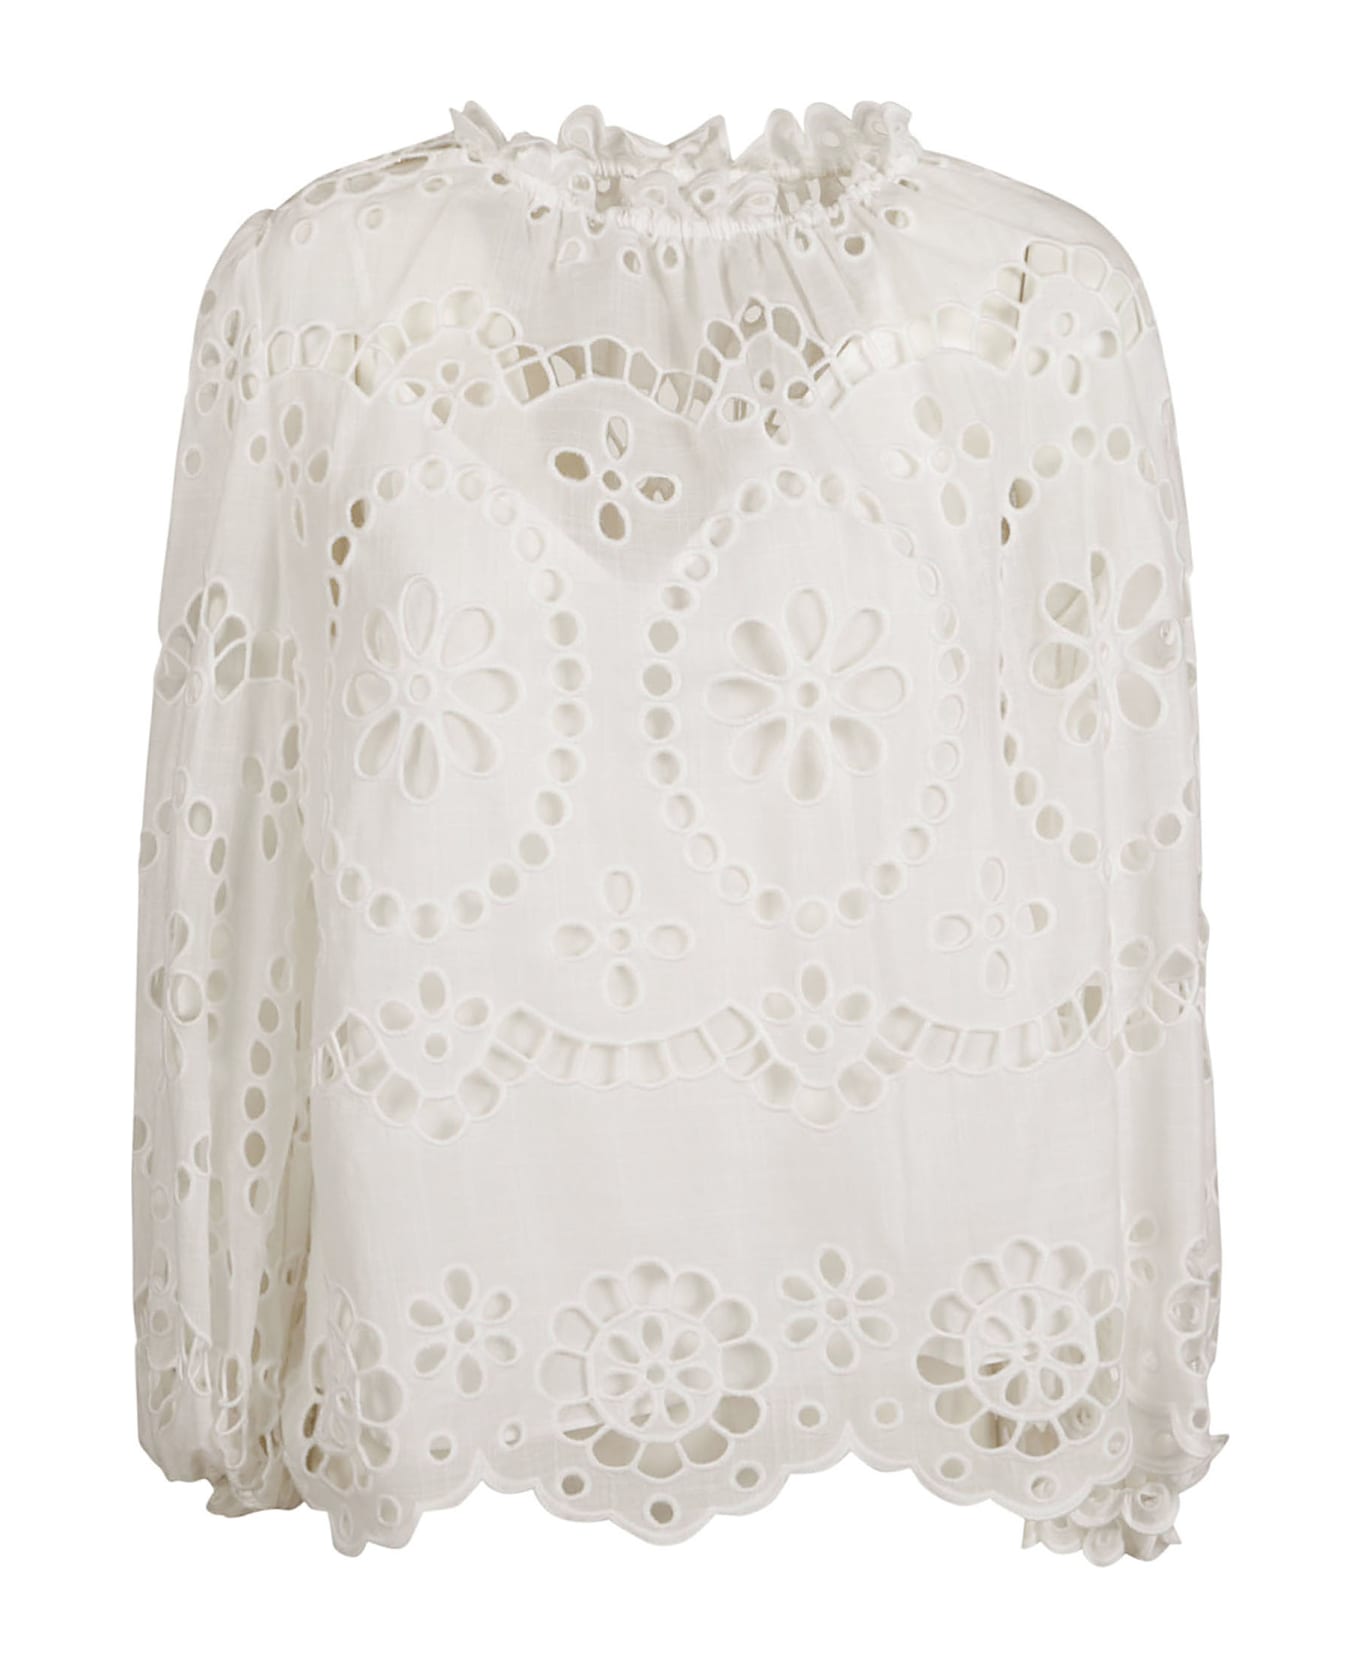 Zimmermann Lexi Embroidered Blouse - Ivory